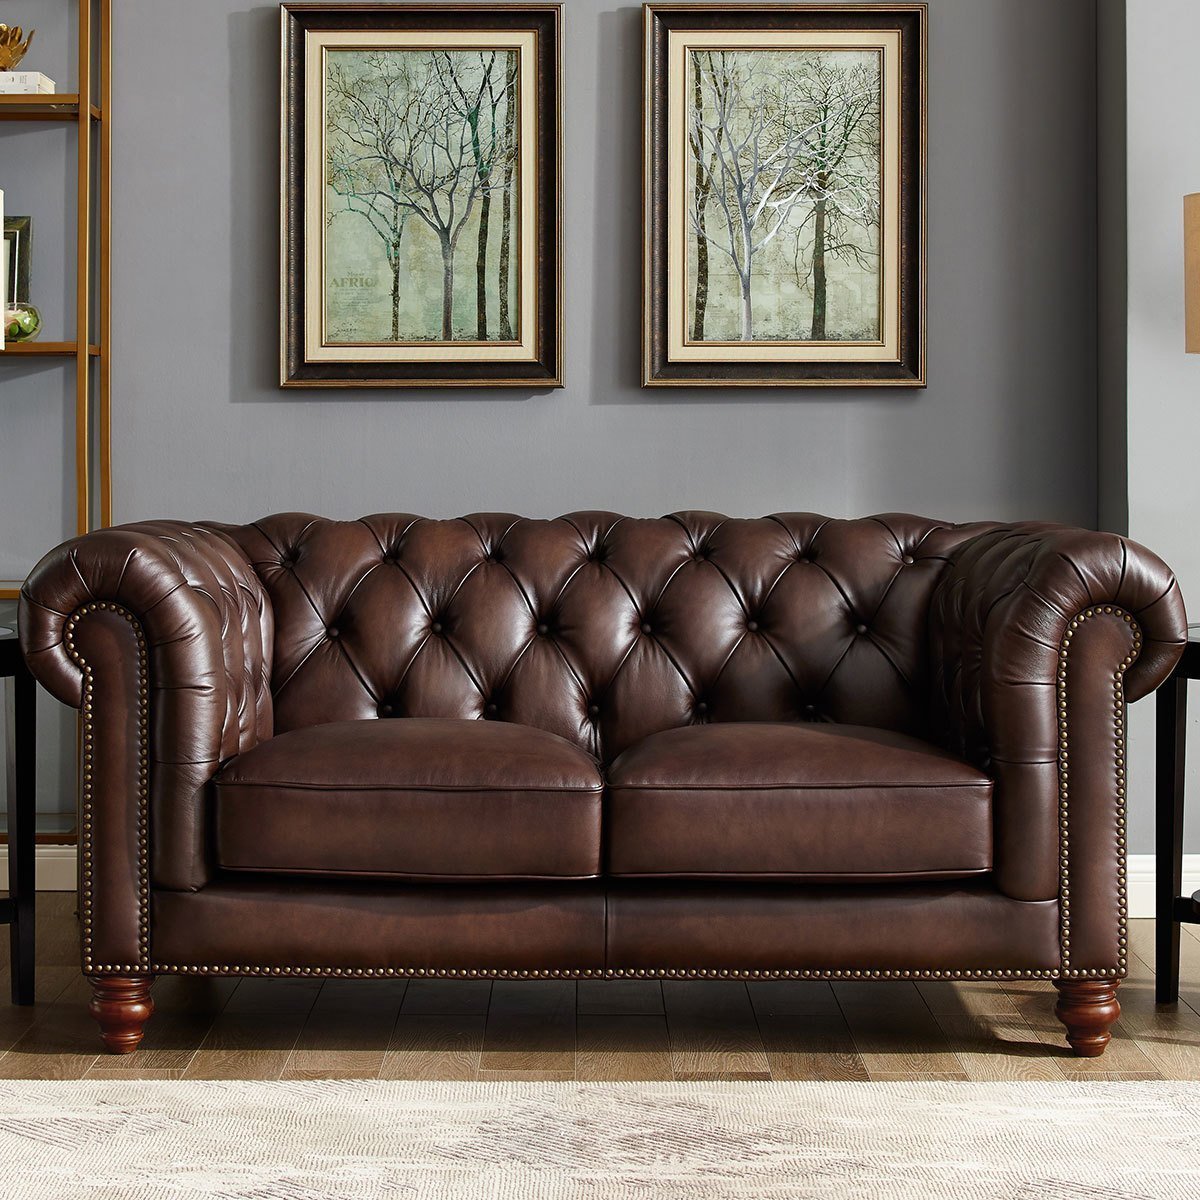 Allington 2 Seater Brown Leather Chesterfield Sofa - Signature Retail Stores